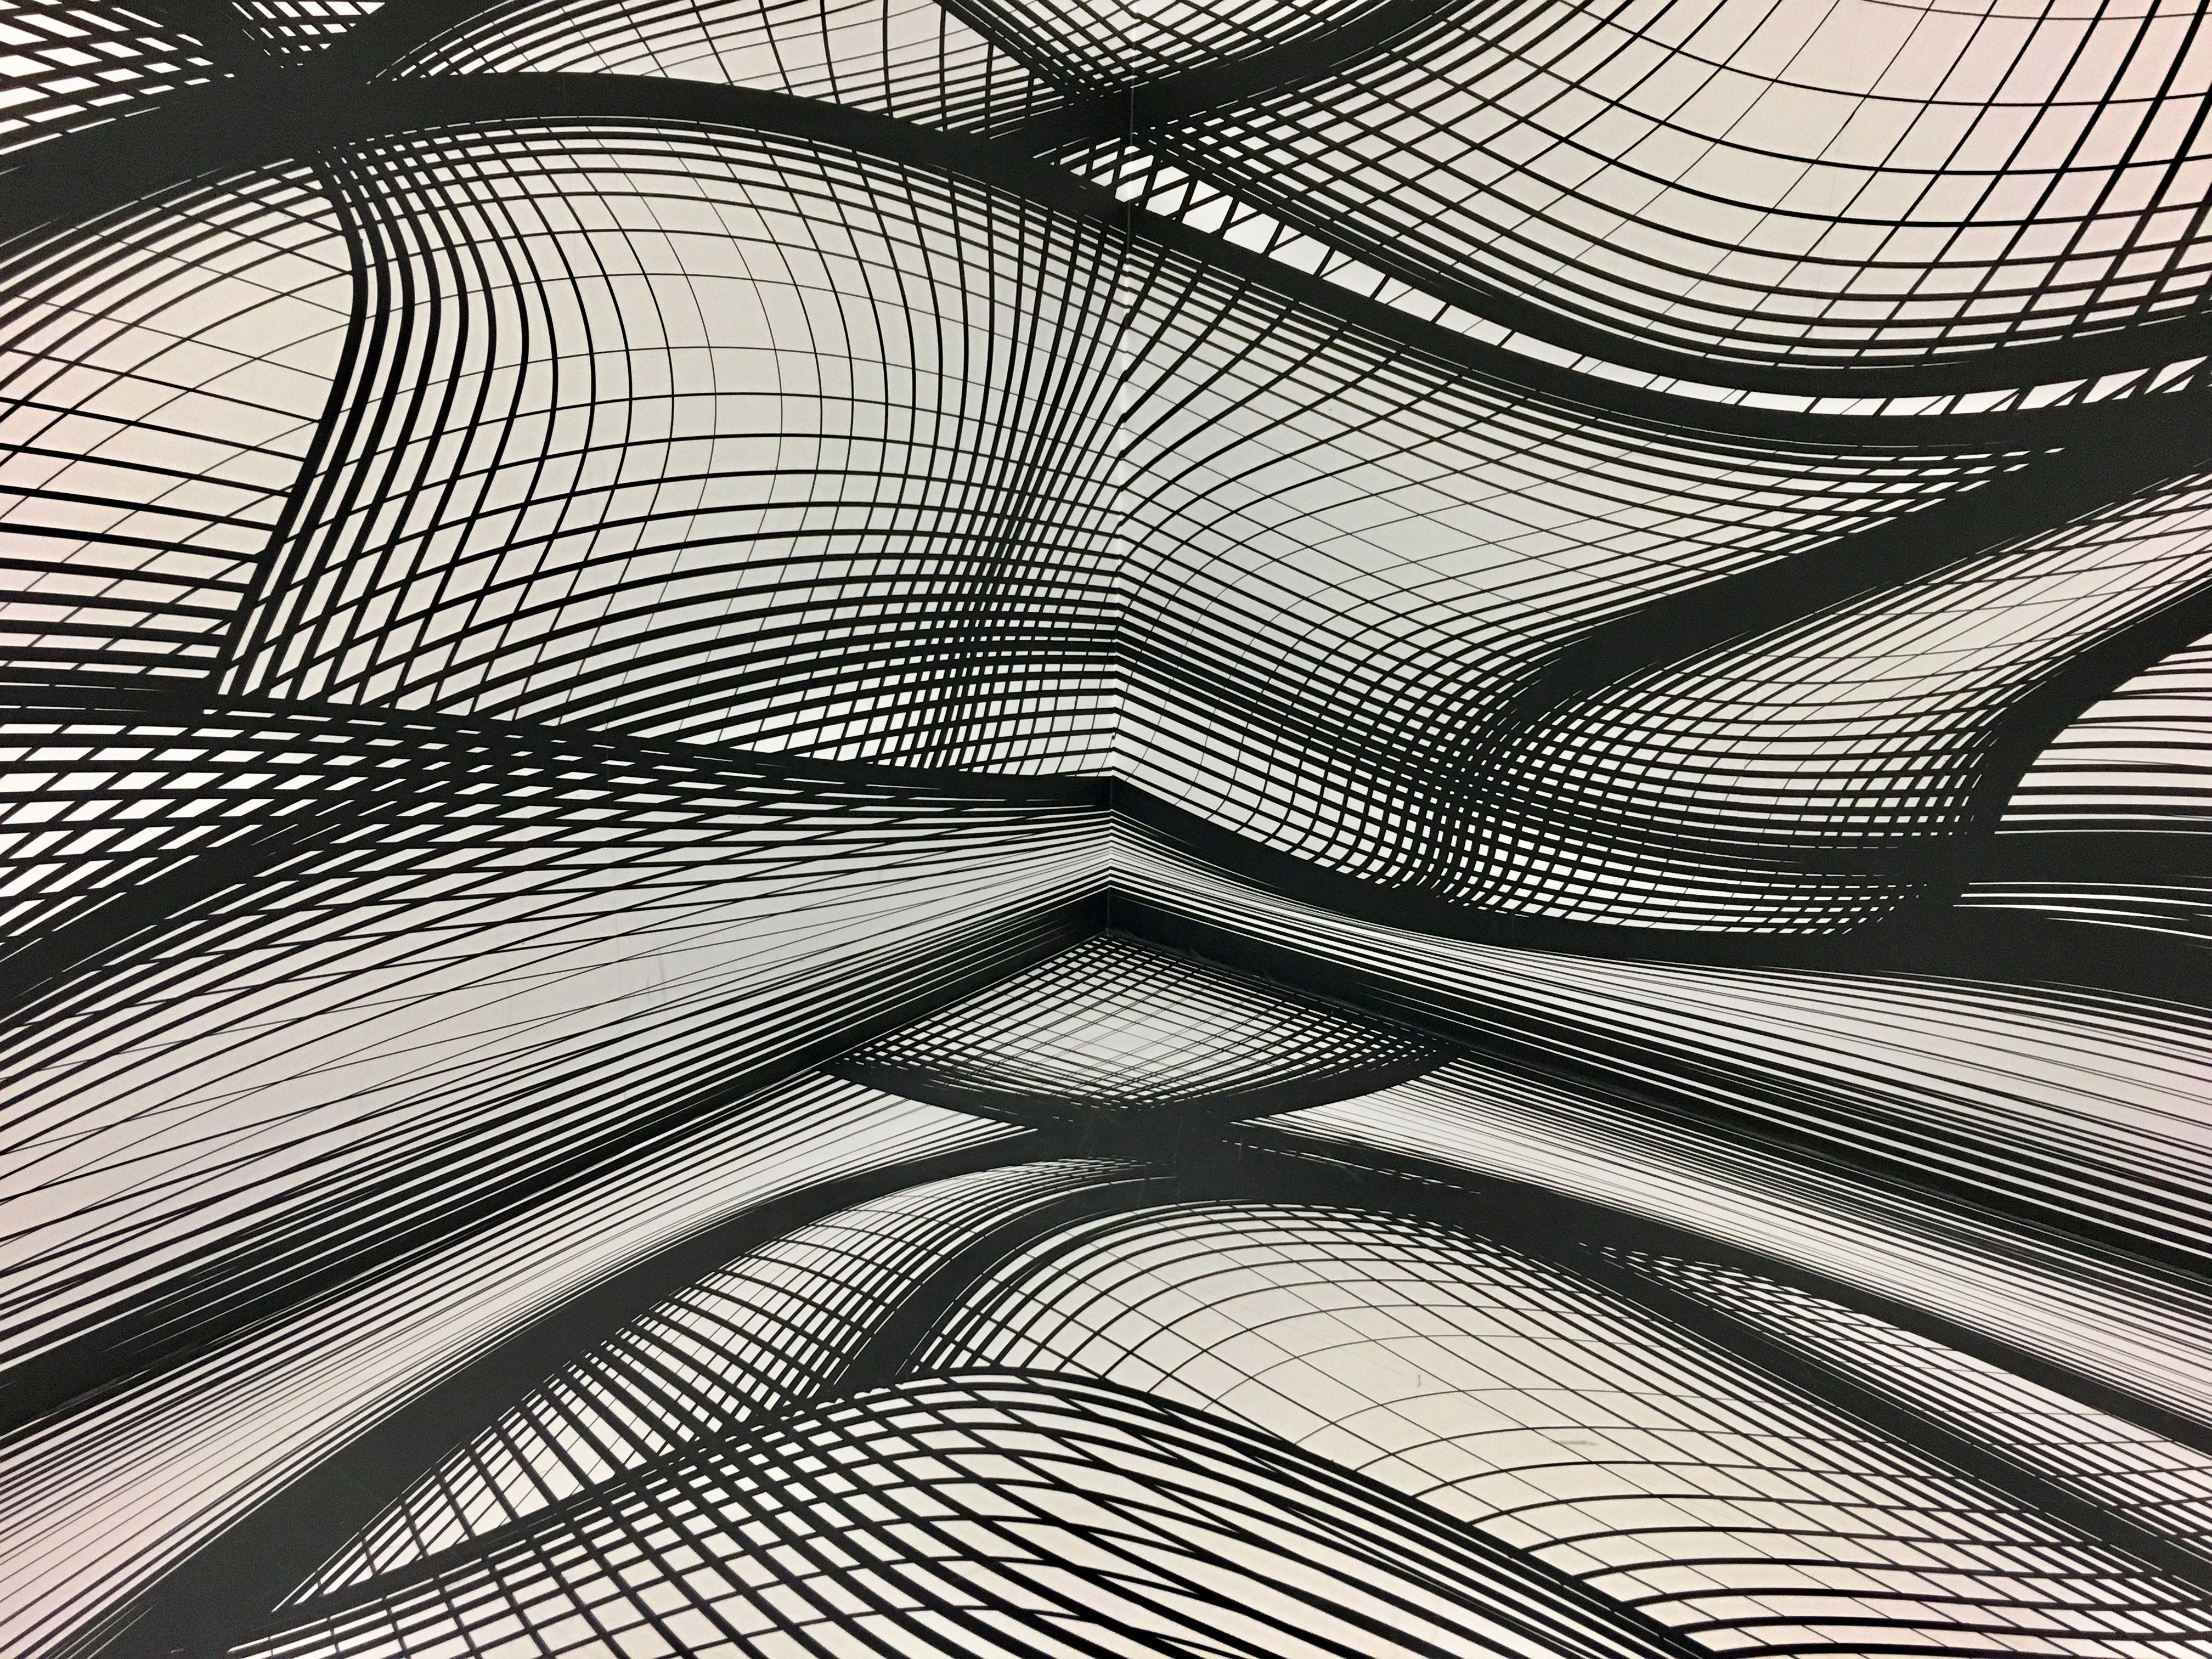 4032x3024 #Free picture, #grid, #line, #abstract, #wallpaper, # pattern, #wave, #monochrome, #form, #object, #black and white, #structure, #graphic, #graph, #wavey, #geometric, #contrast HD Wallpaper